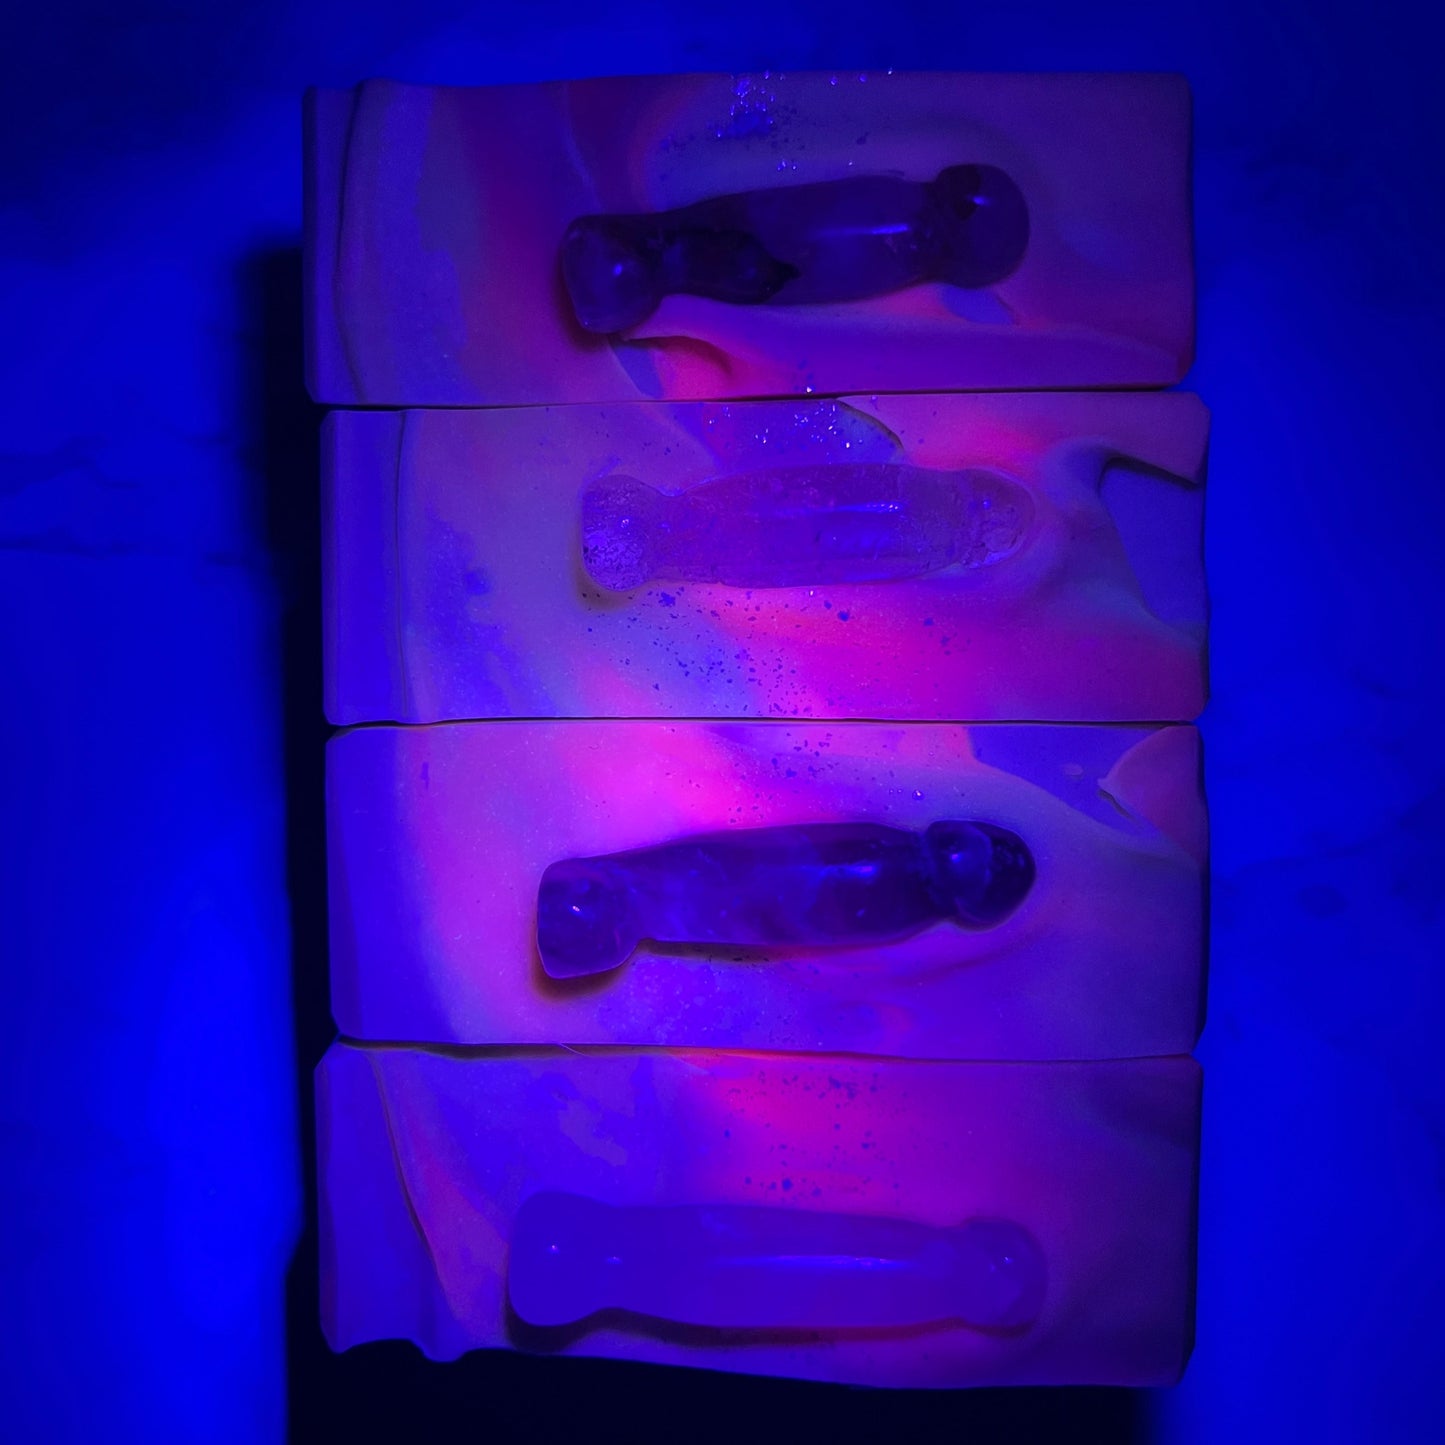 Crystal soap with crystal penises glowing under UV light